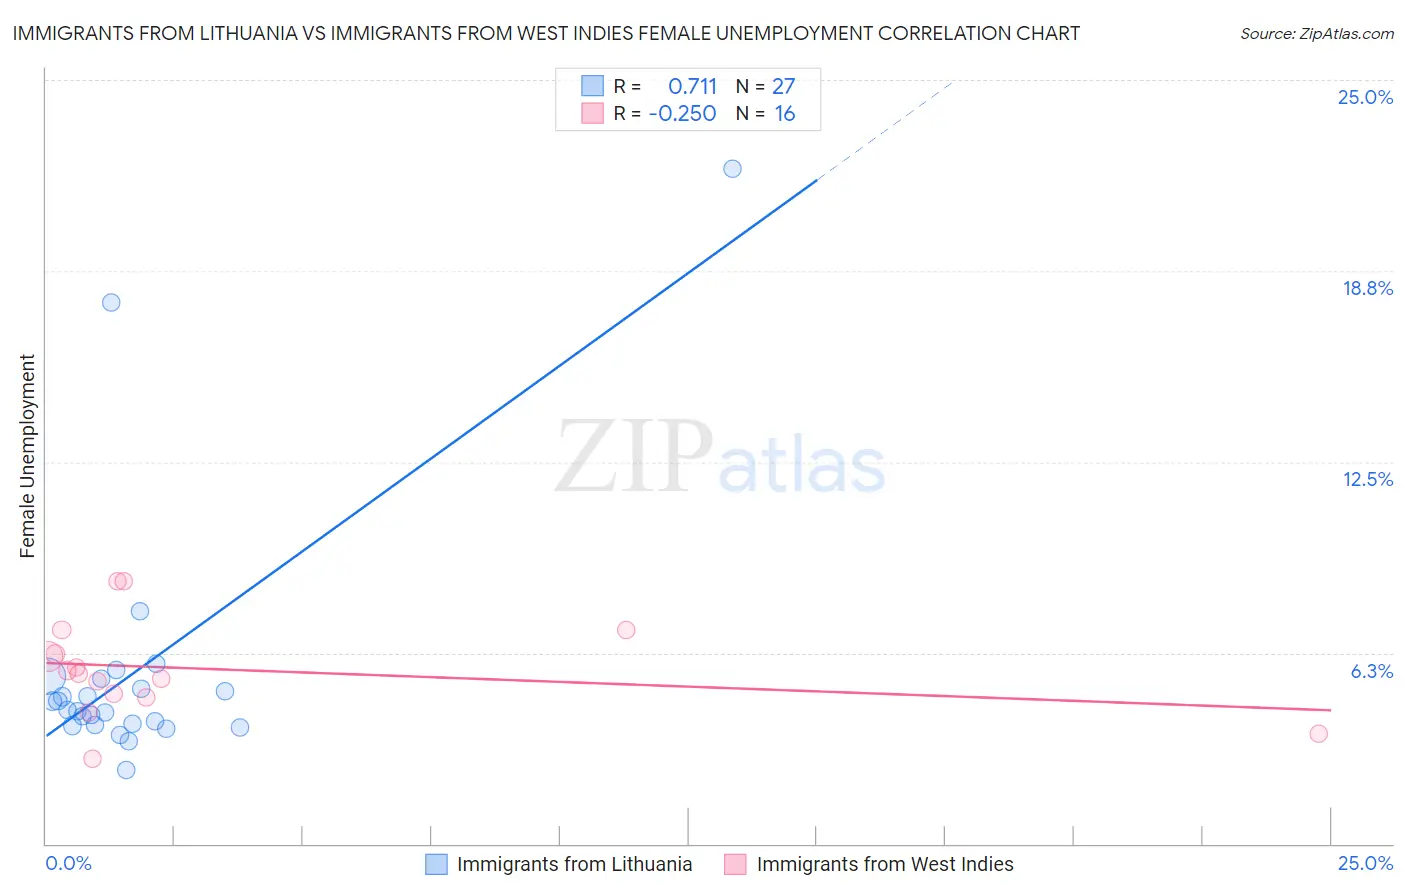 Immigrants from Lithuania vs Immigrants from West Indies Female Unemployment